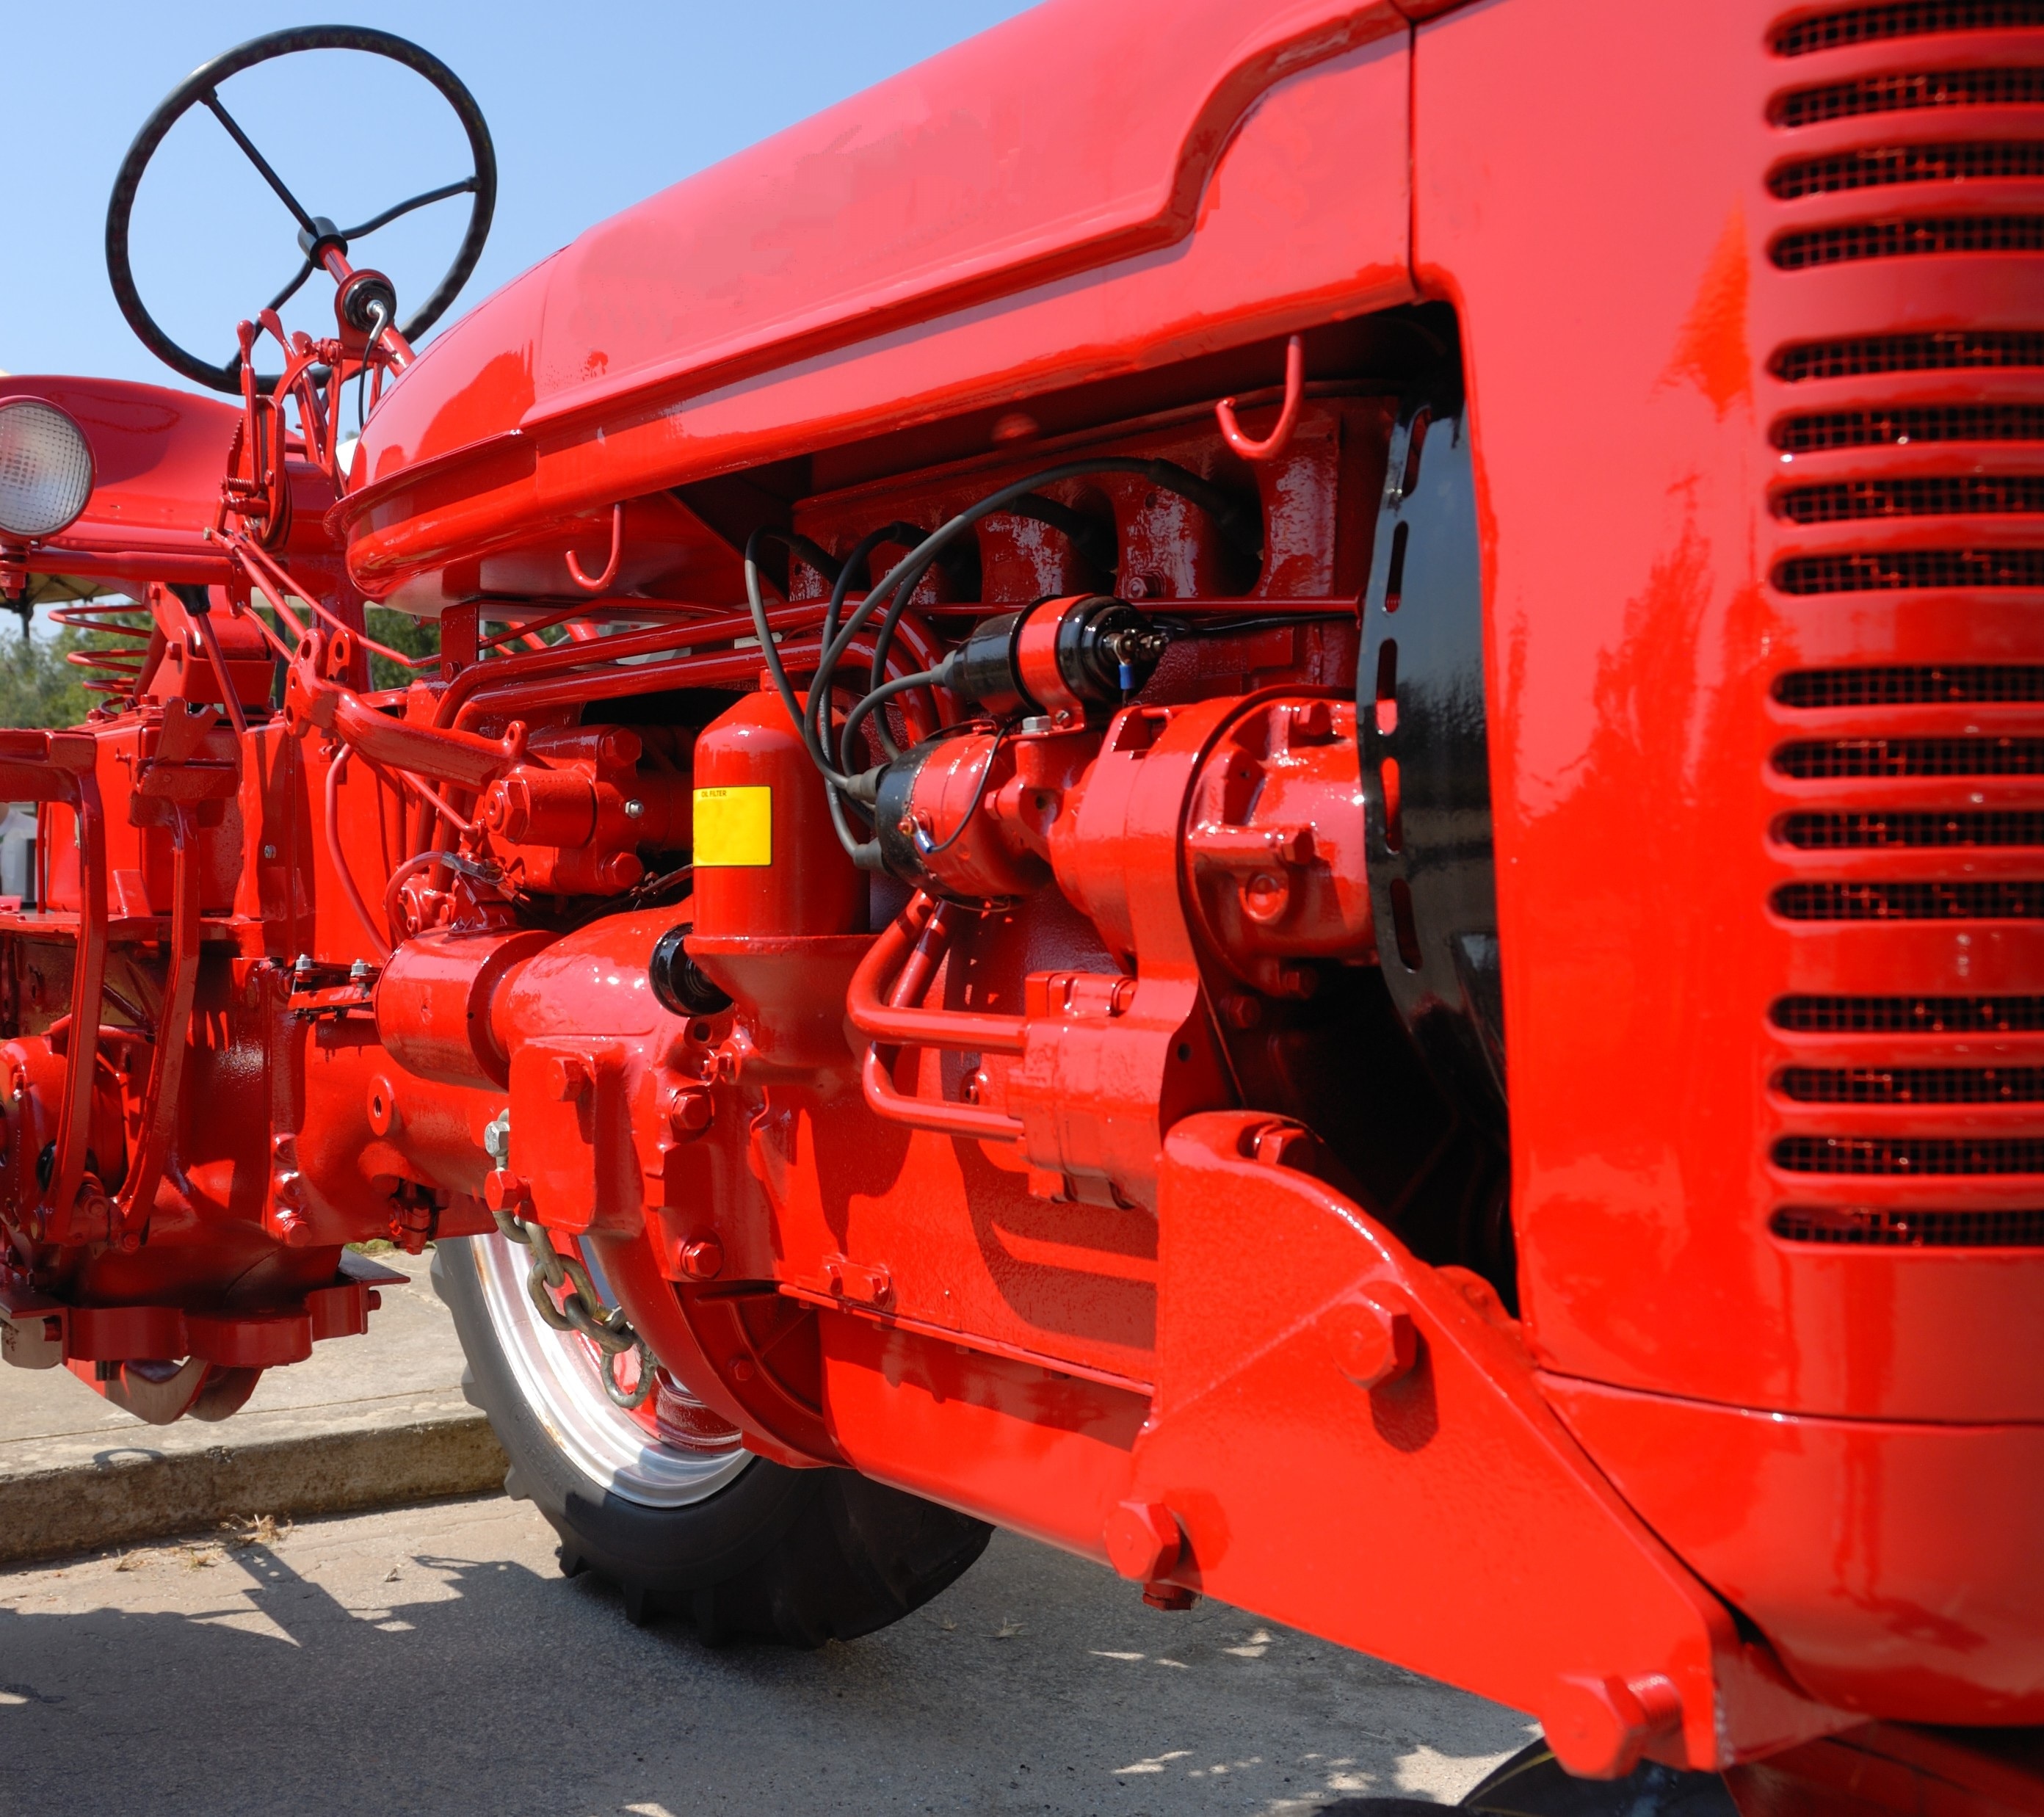 Motor, Retro, Power, Engine, Red Tractor, red, transportation